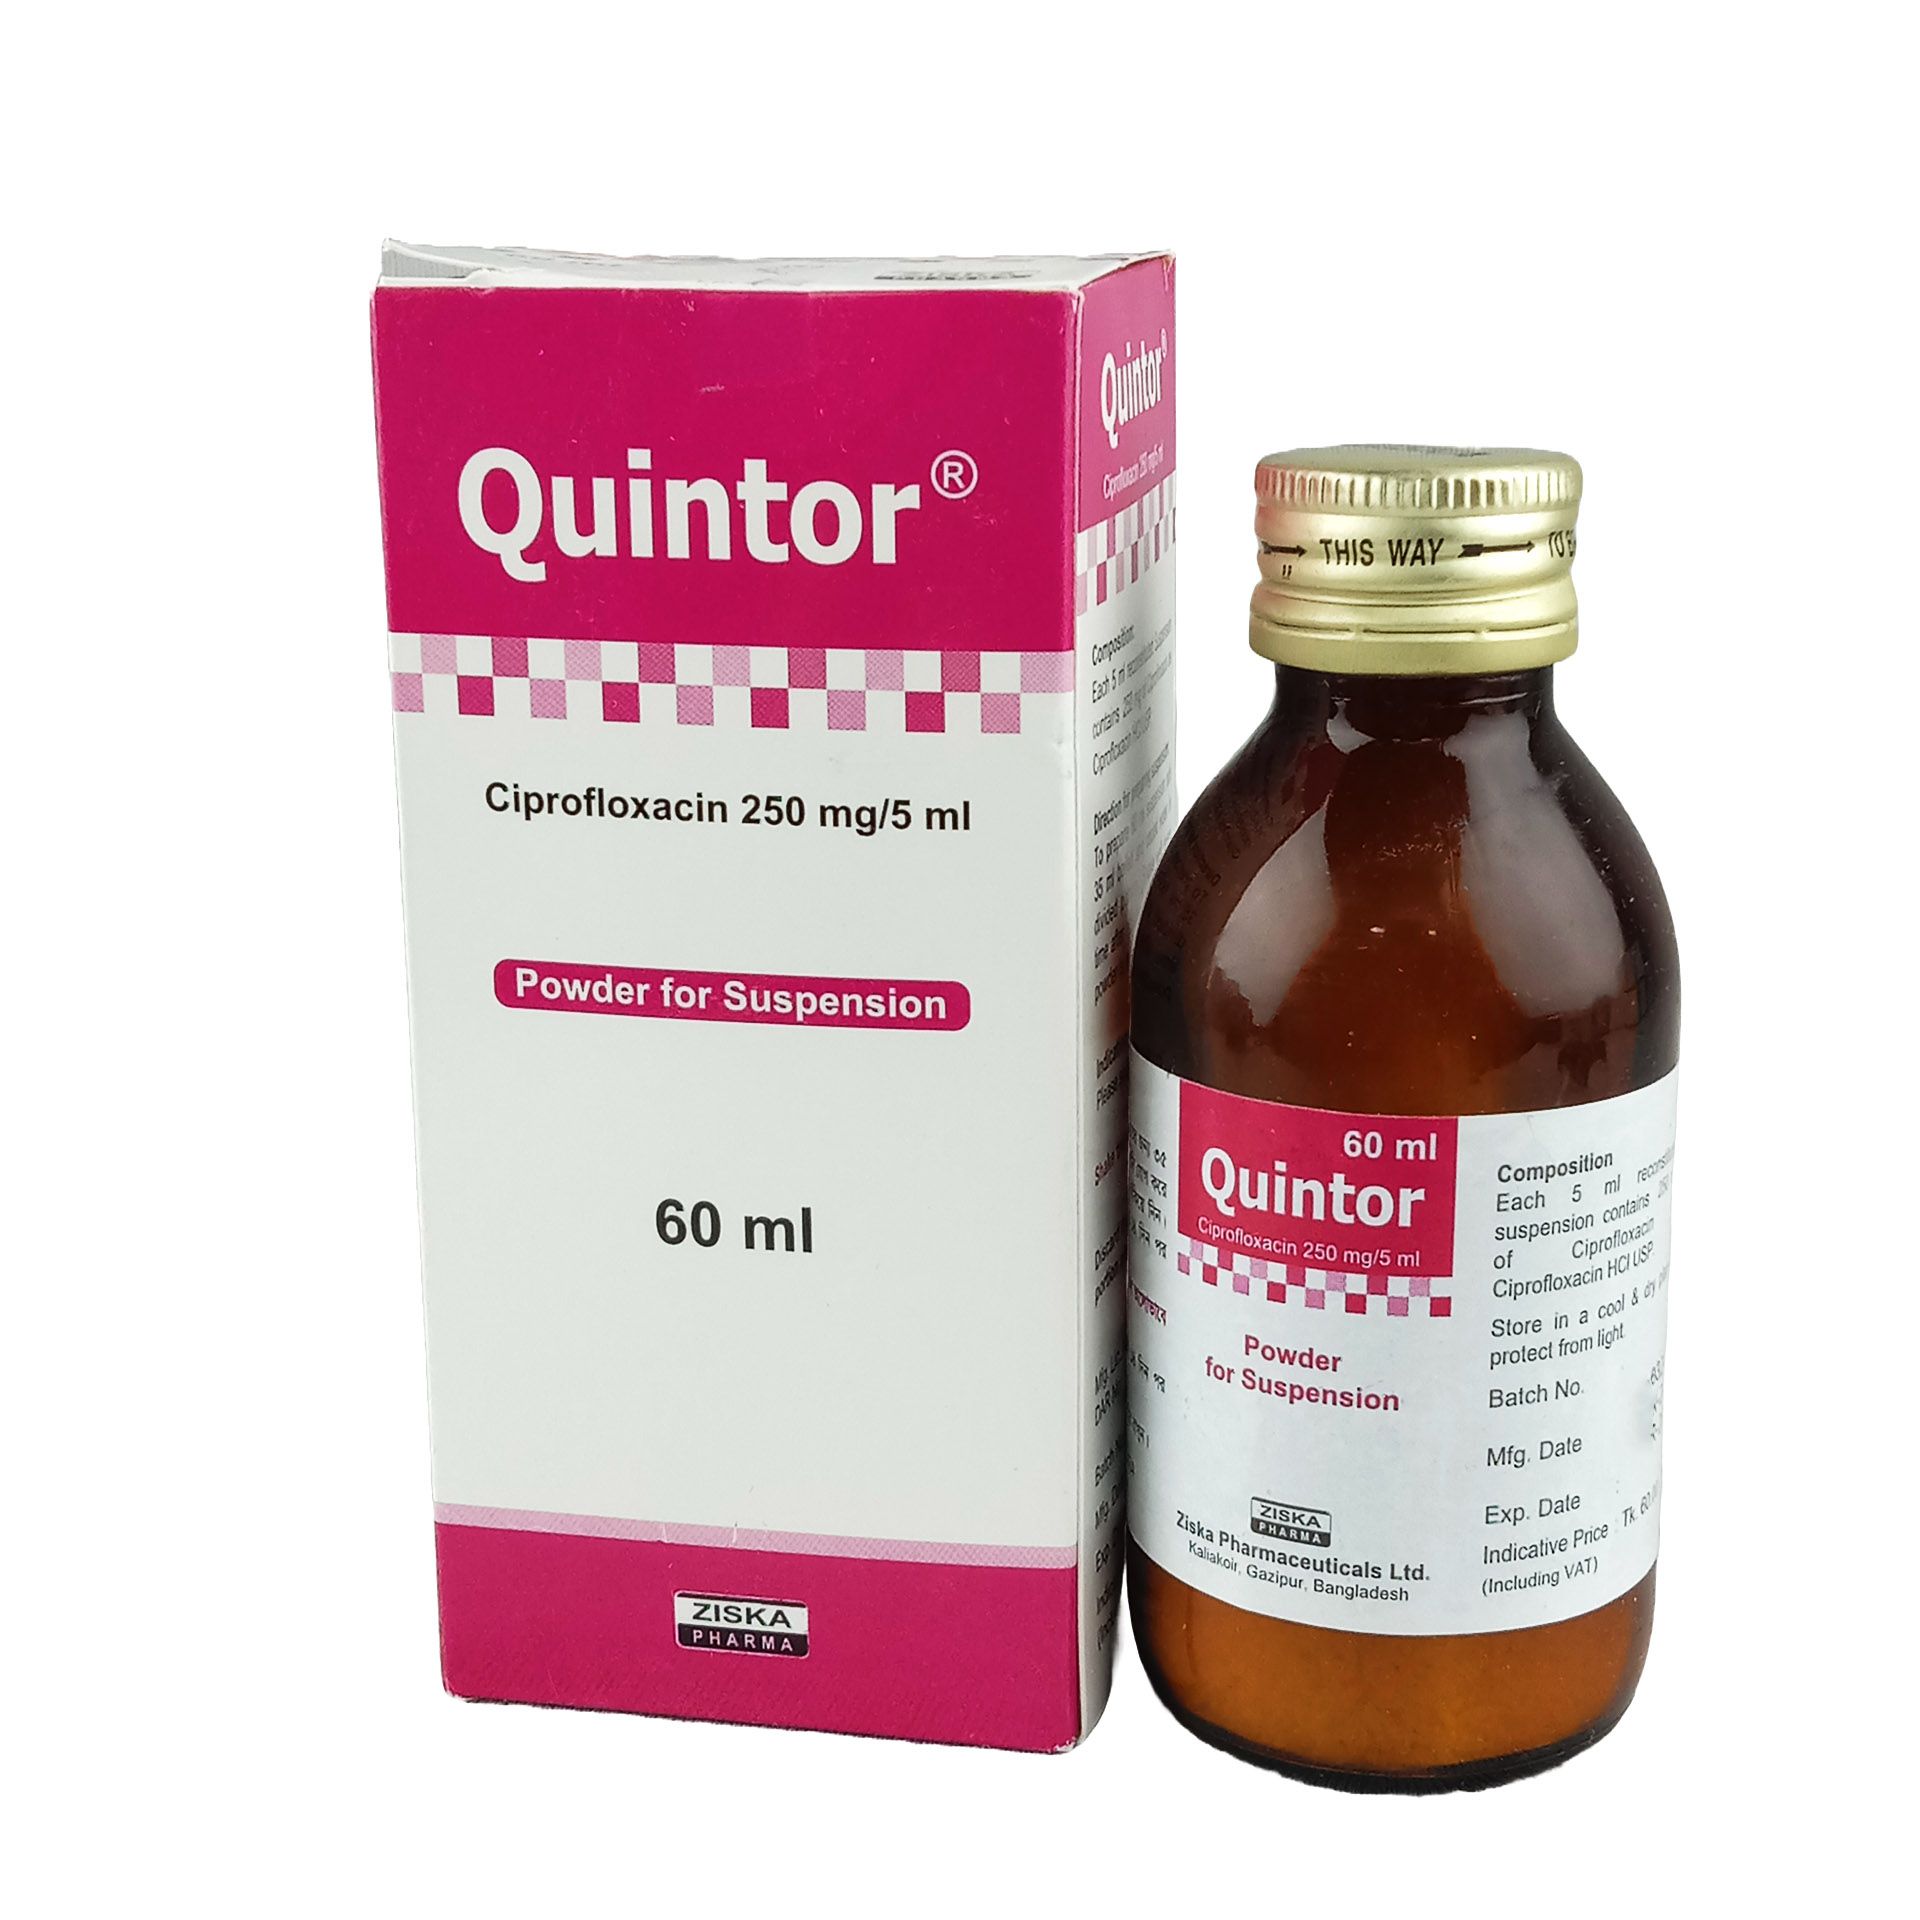 Quintor 250mg/5ml Powder for Suspension